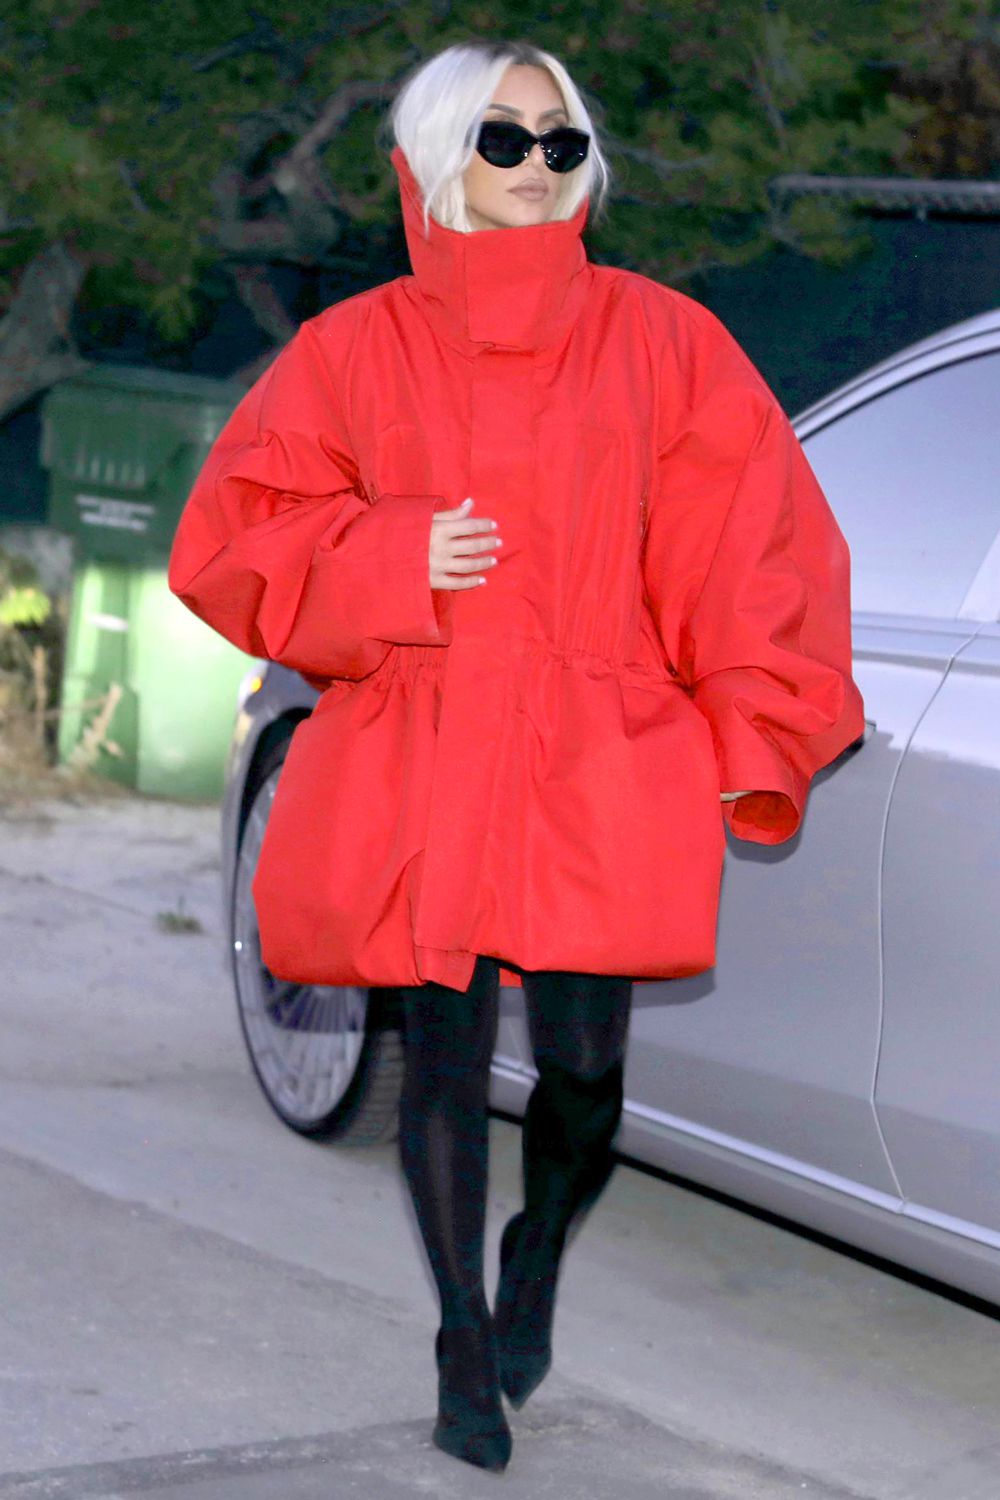 Kim Kardashian steps out at a friend's dinner in red jacket and new blonde hair in Malibu after returning from The White House..